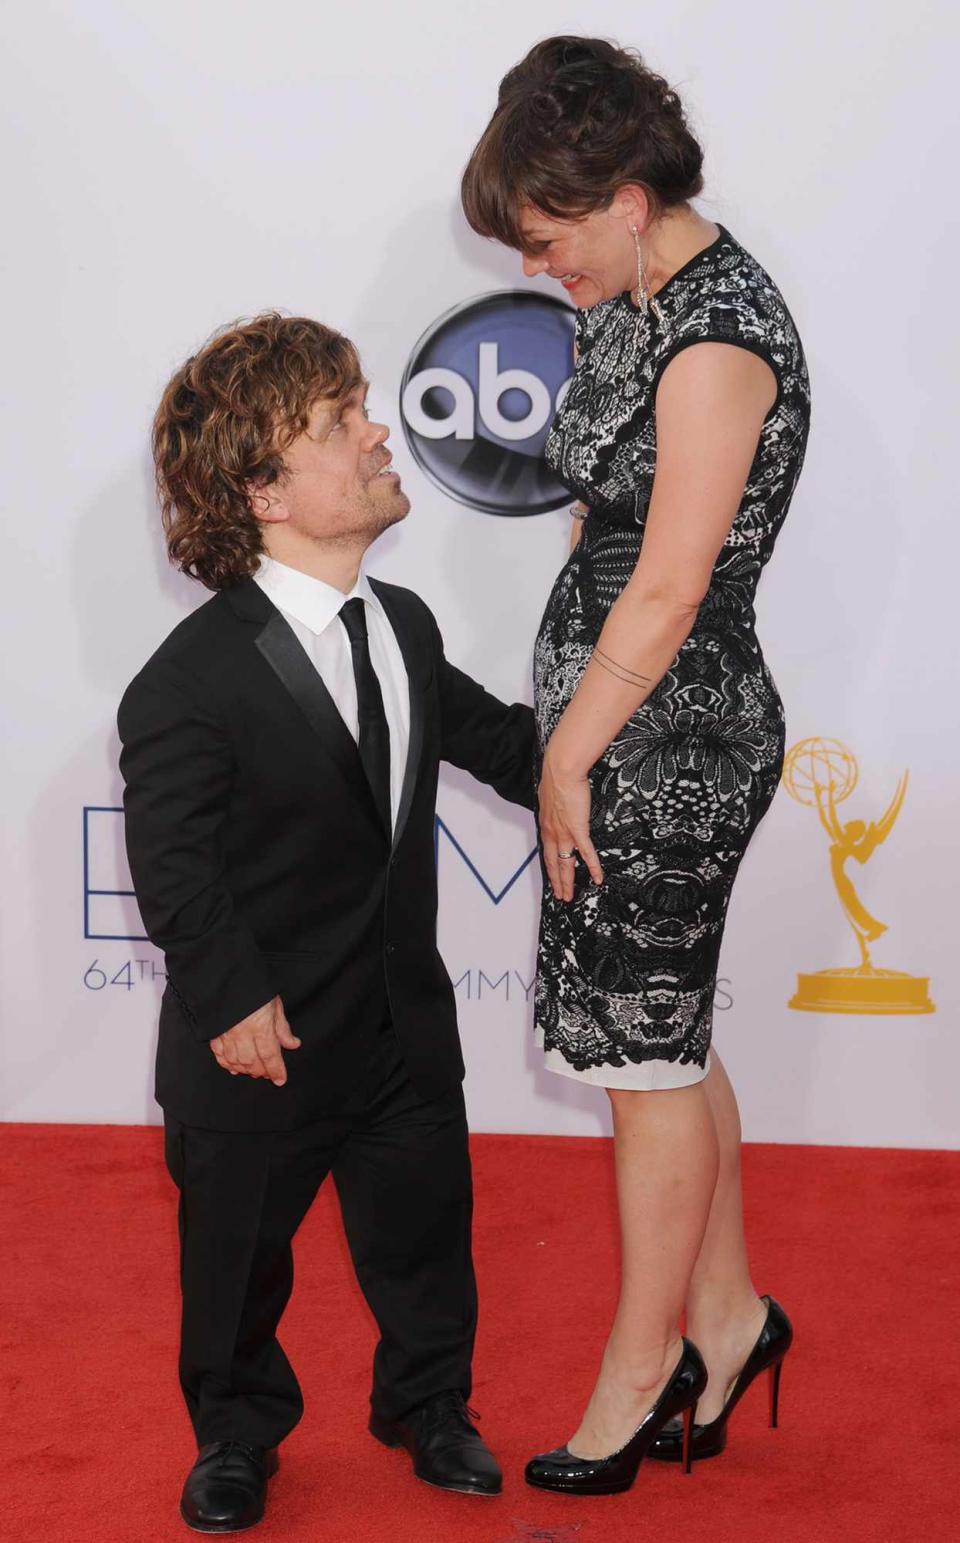 Who Is Peter Dinklage Married To? Unveiling The Talented Actor's Secret Love Story